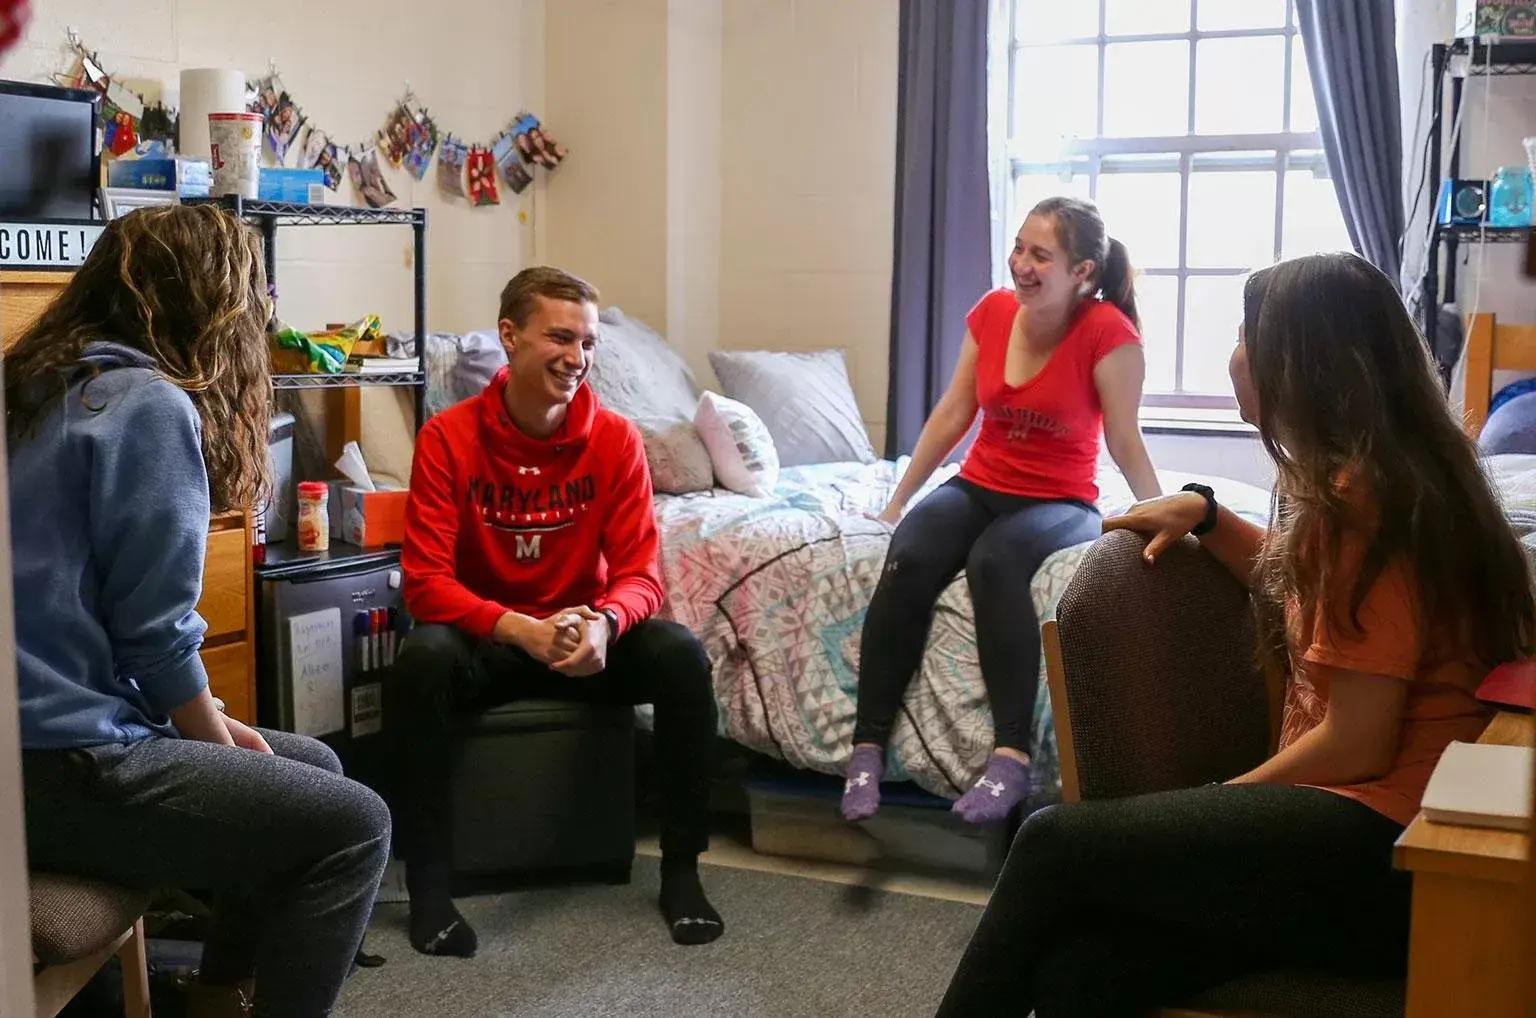 Group of students in a dorm room